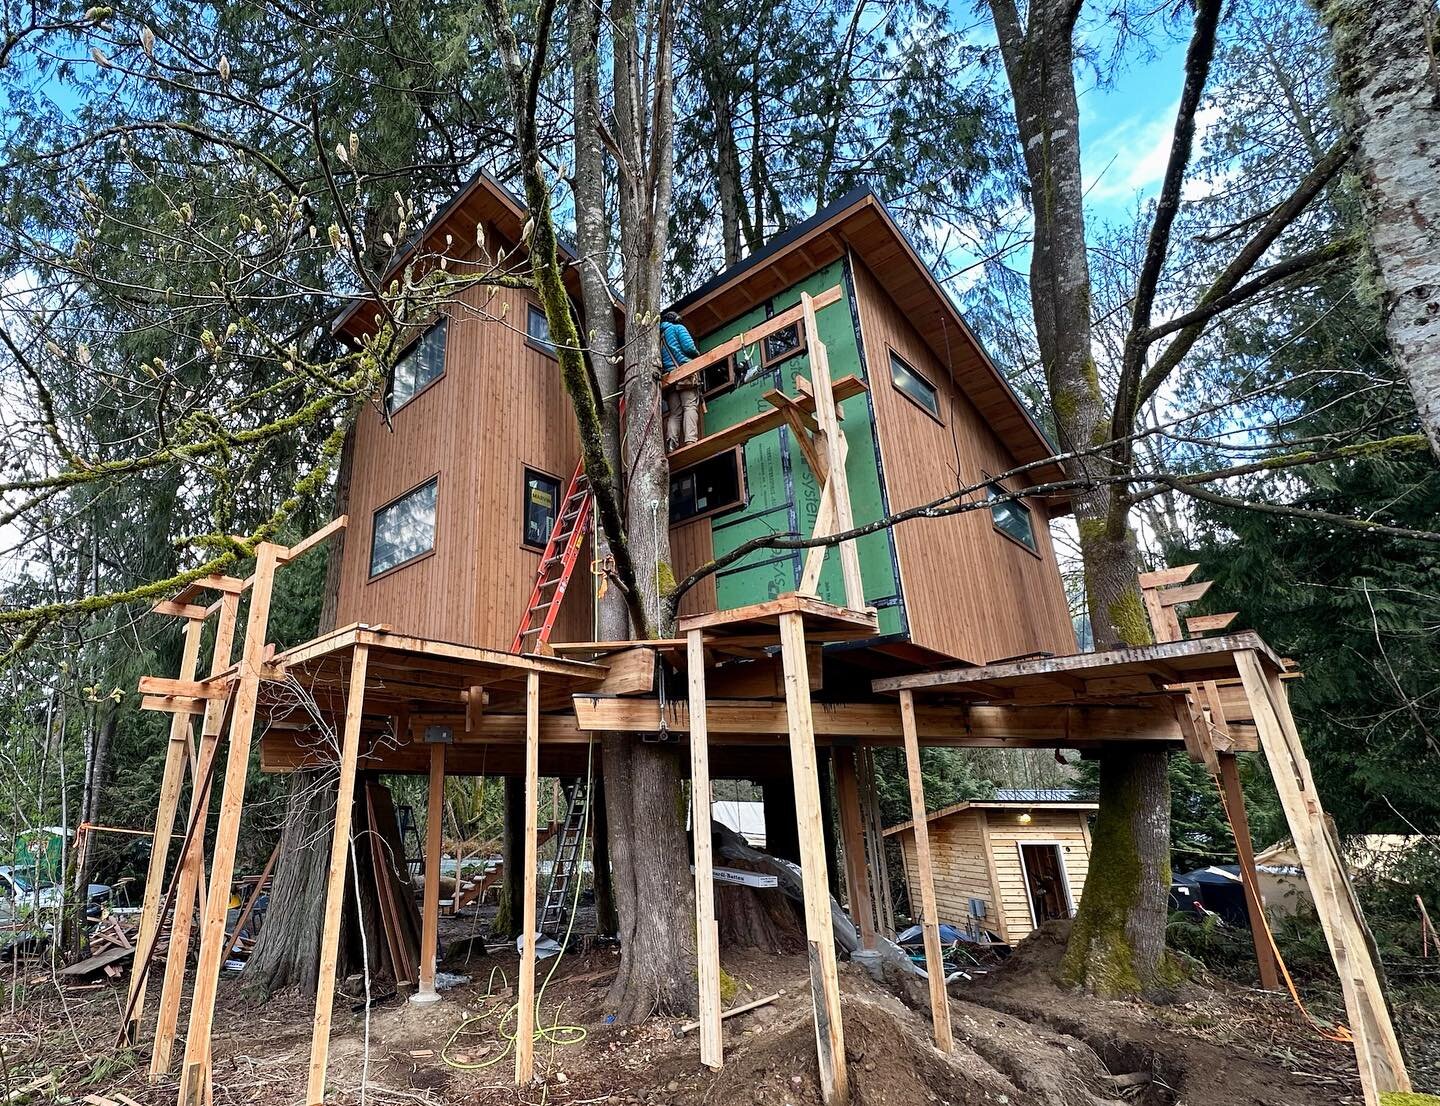 Lots of progress on the @twinleaftreehouse project! 
Cedar siding nearly complete 🪚
Roofing &amp; gutters installed 🌧️
Electrical, plumbing, and HVAC roughed in ⚡️
Ceiling spray-foam insulation in 🥪
Wall blocking complete and ready for batt insula